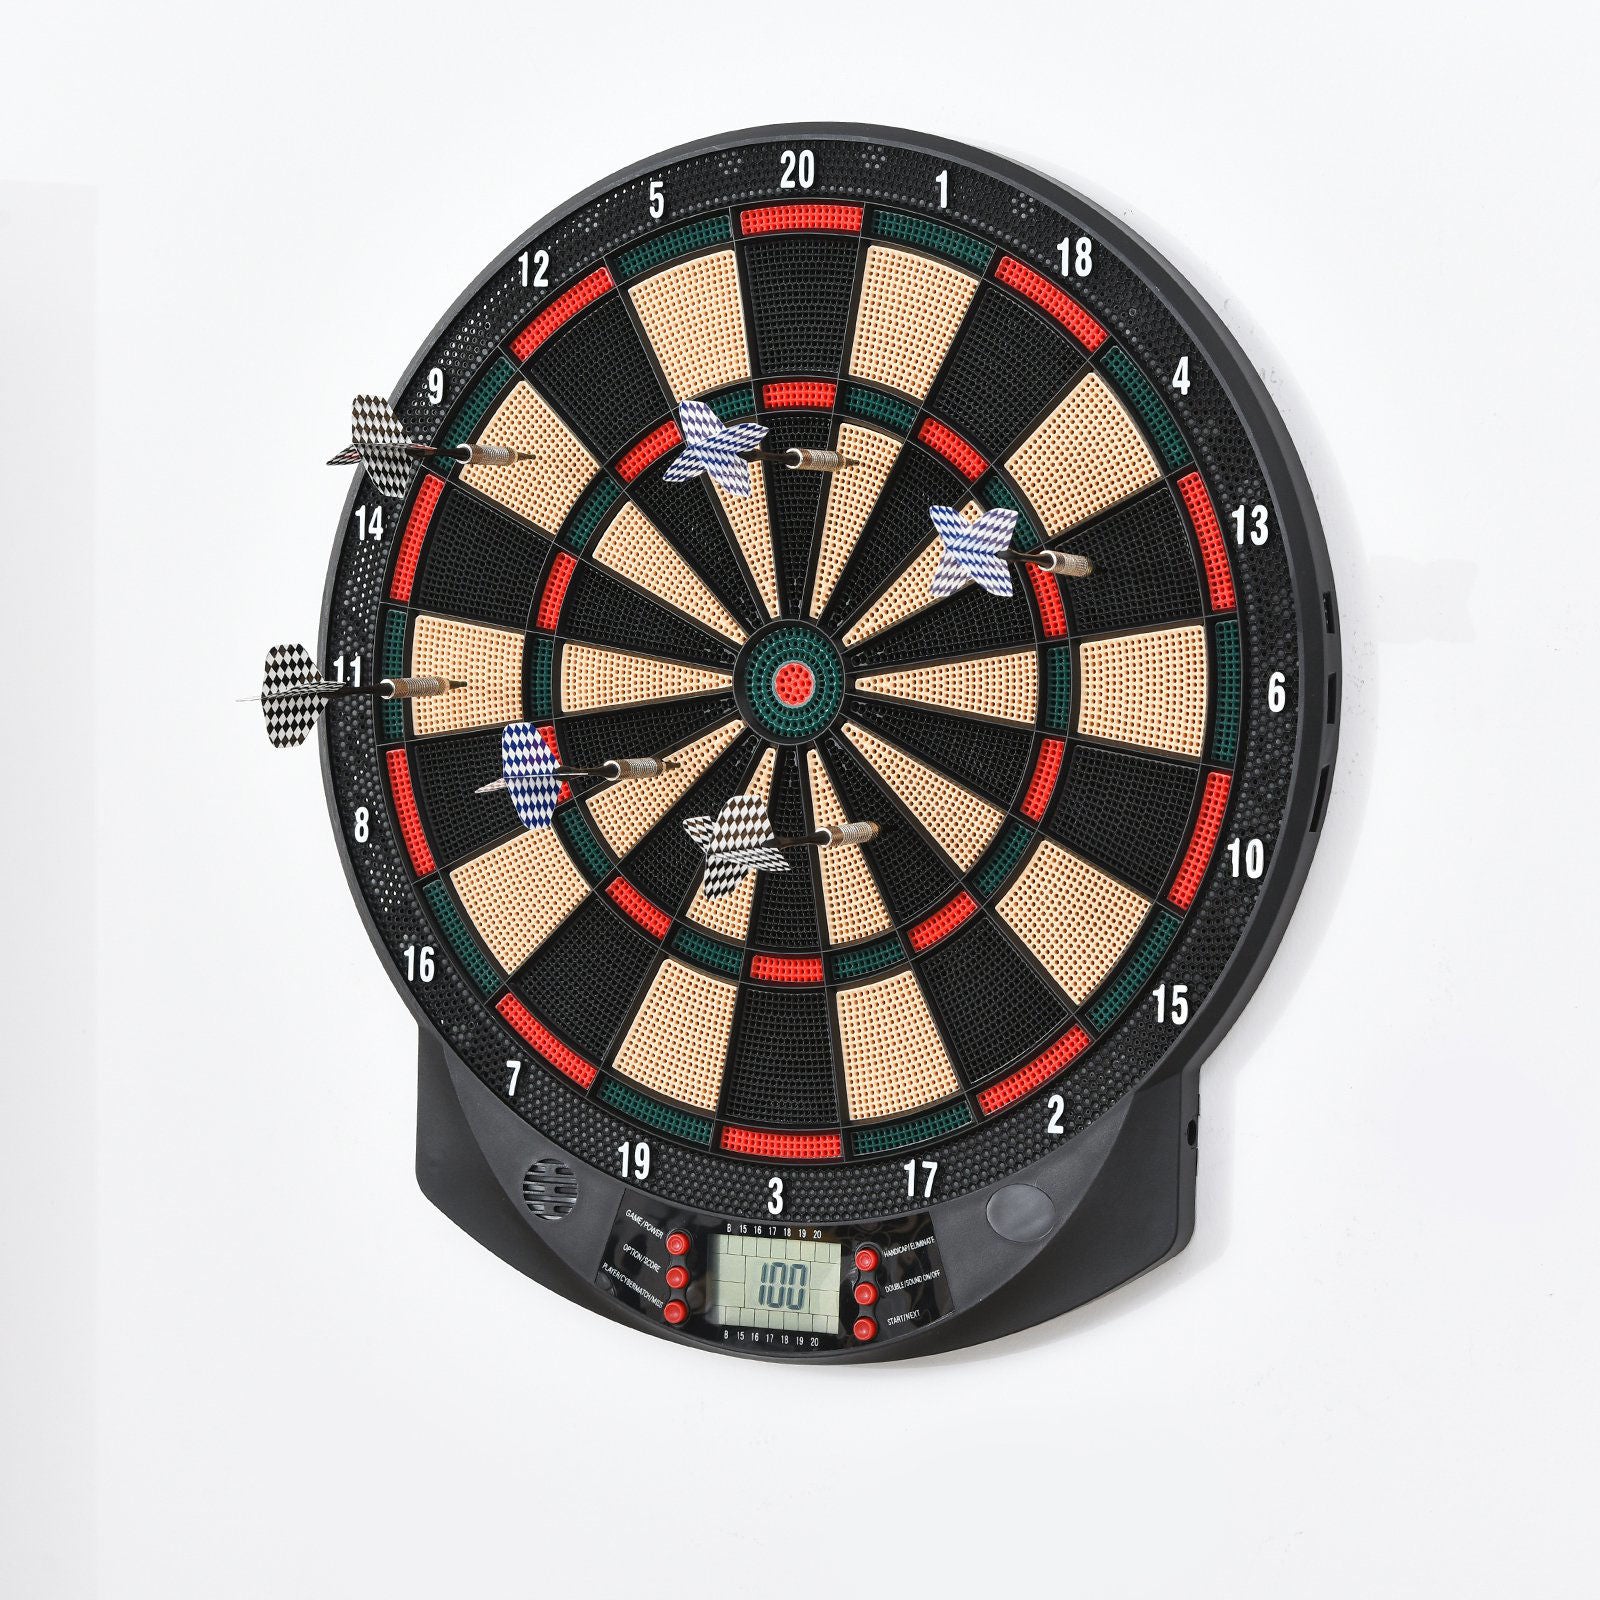 Nancy's Aces Lake Electronic dartboard with 6 darts, 30 dart heads, 26 games and 185 scoring options for 8 players, Sound effects